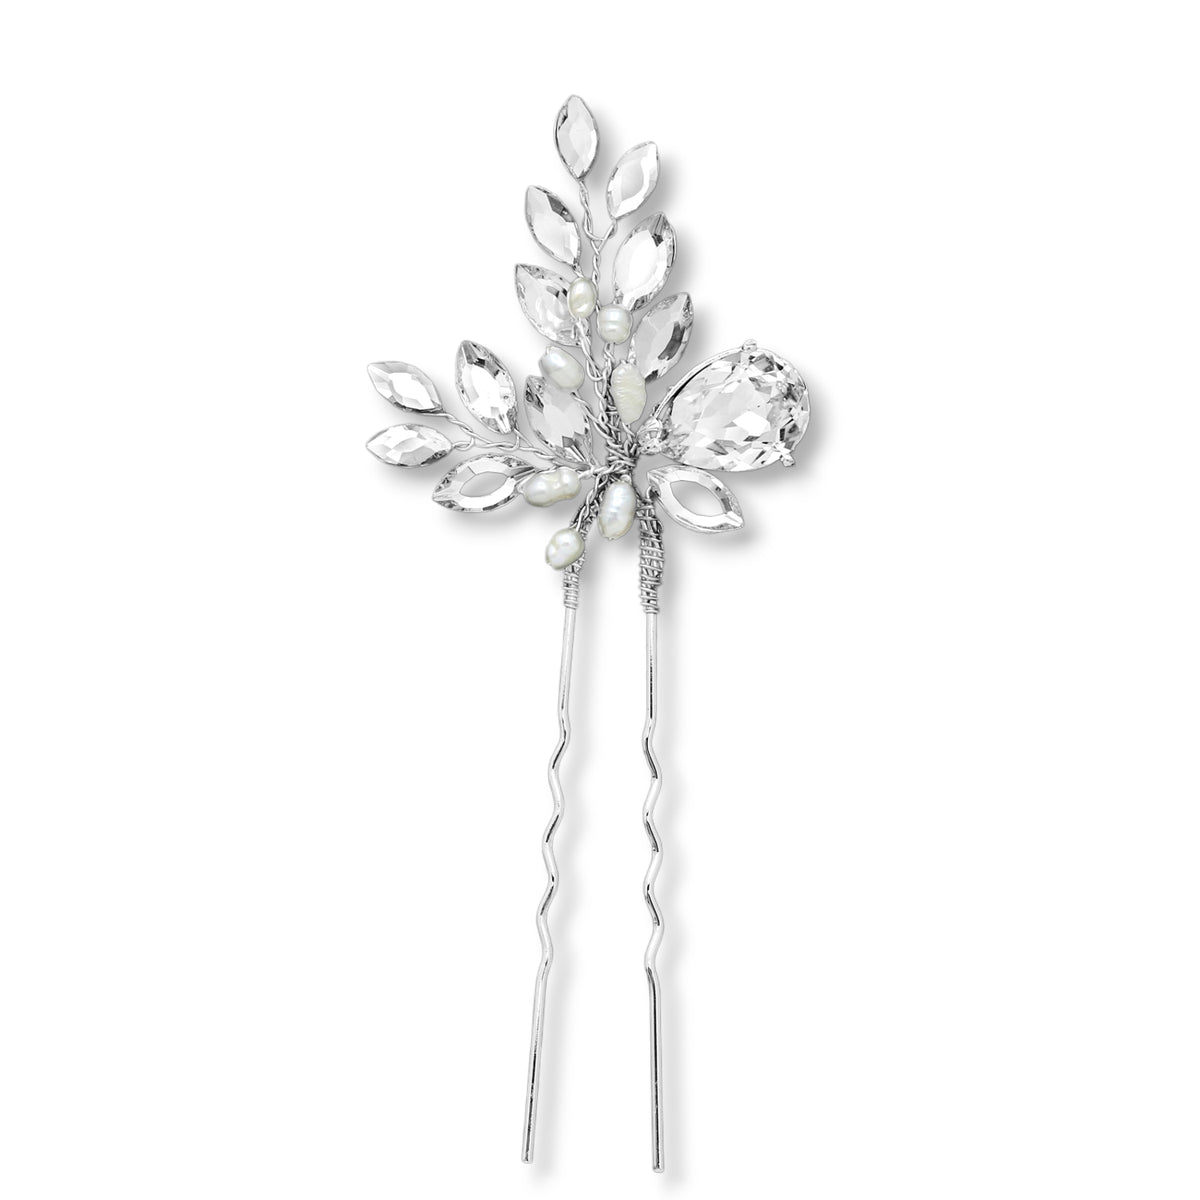 Bridal Hair Pin of Freshwater Pearls and Crystals - Cassandra Lynne